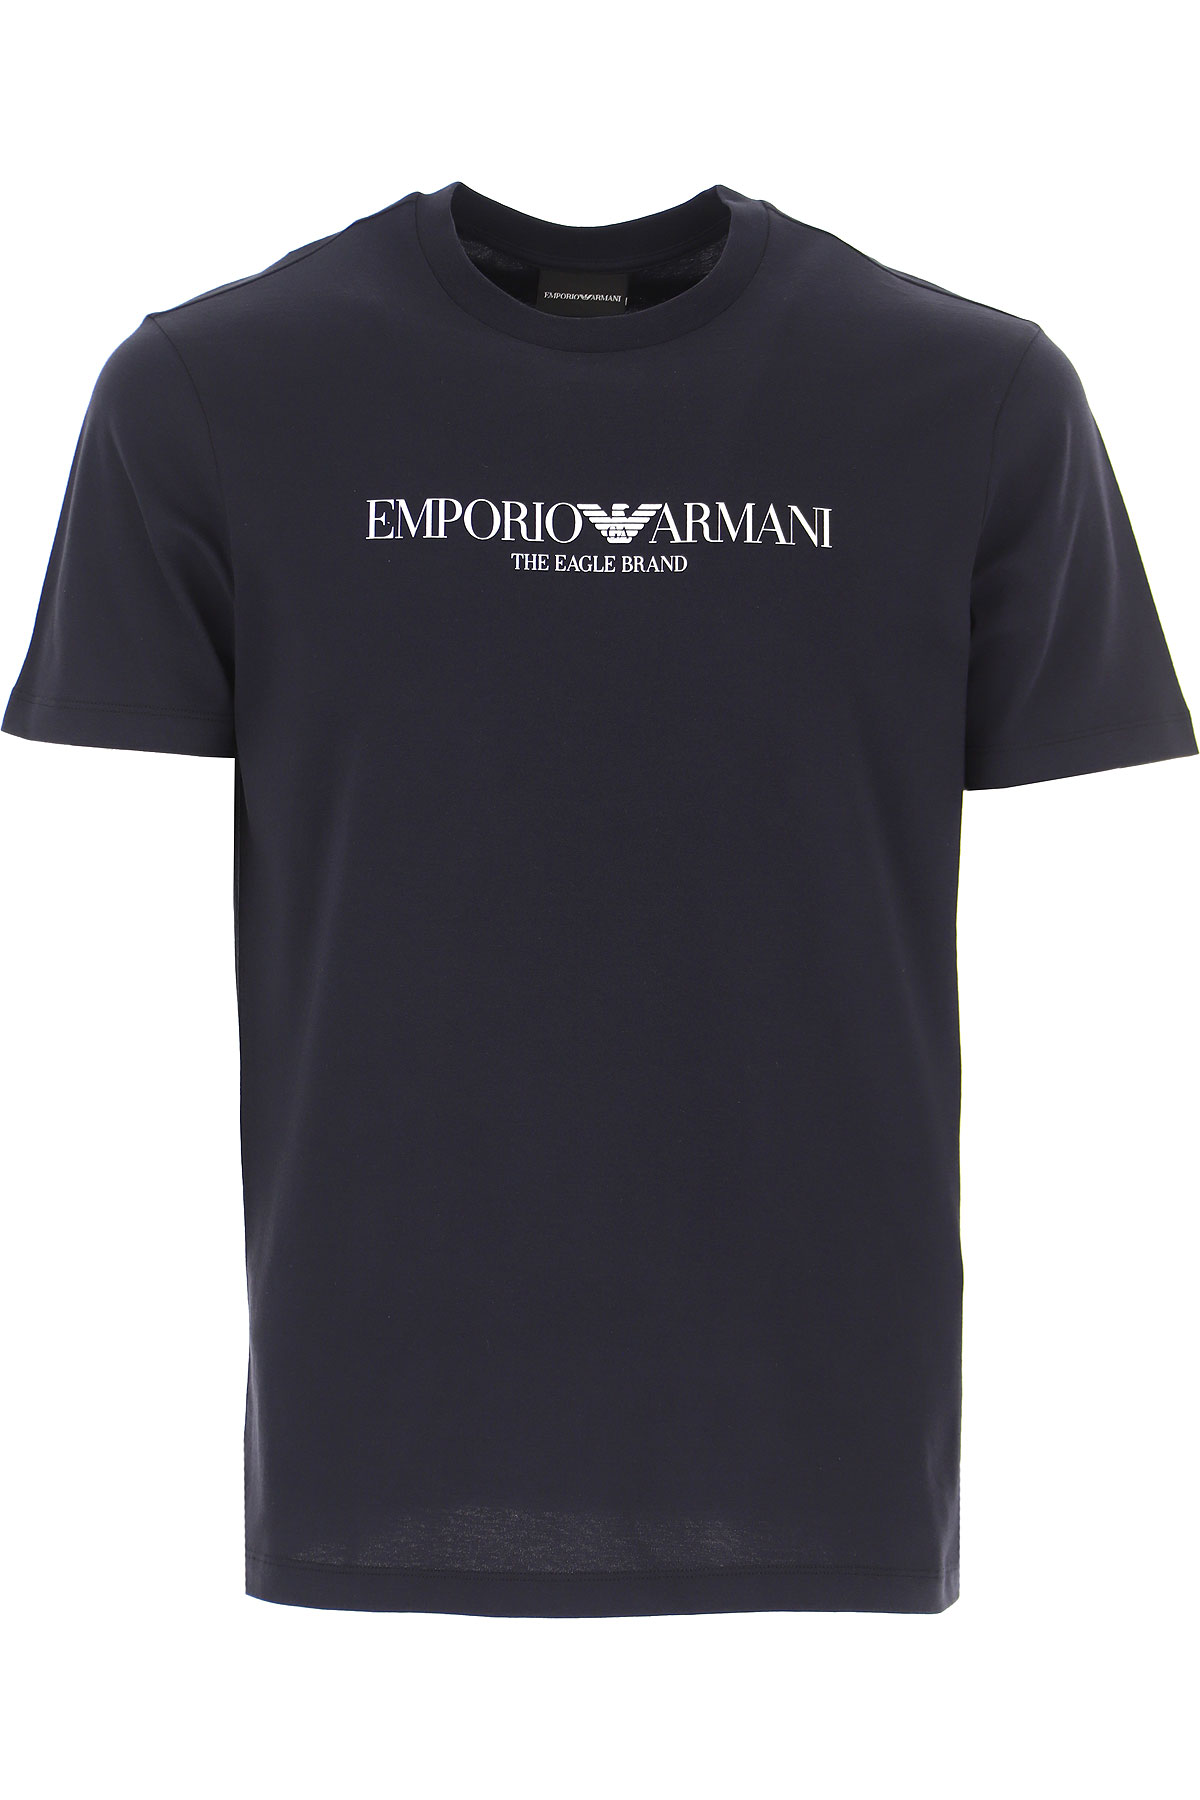 Mens Clothing Emporio Armani, Style code: 8n1t61-1j00z-0922